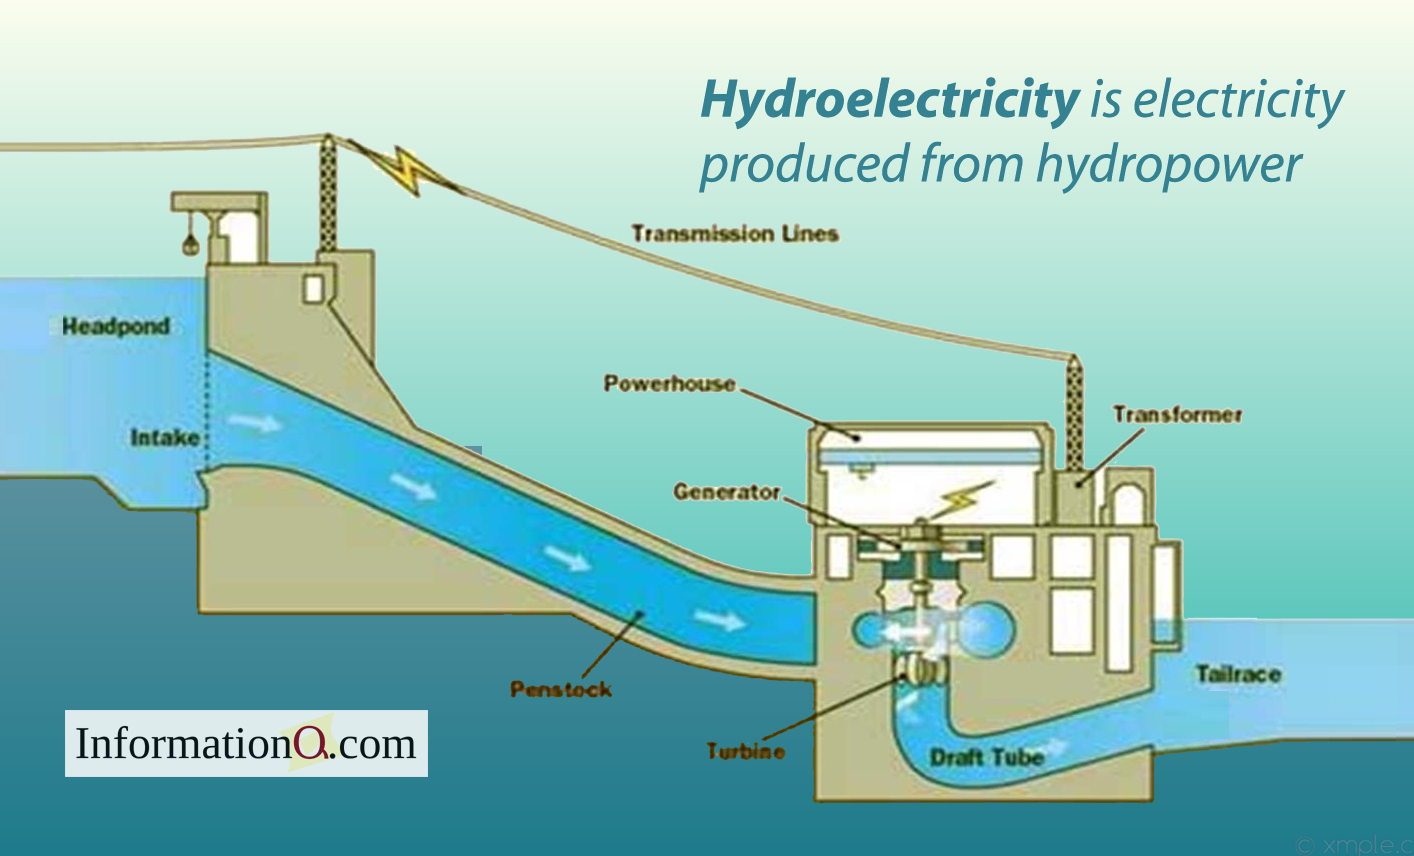 Hydroelectricity is electricity produced from hydropower.